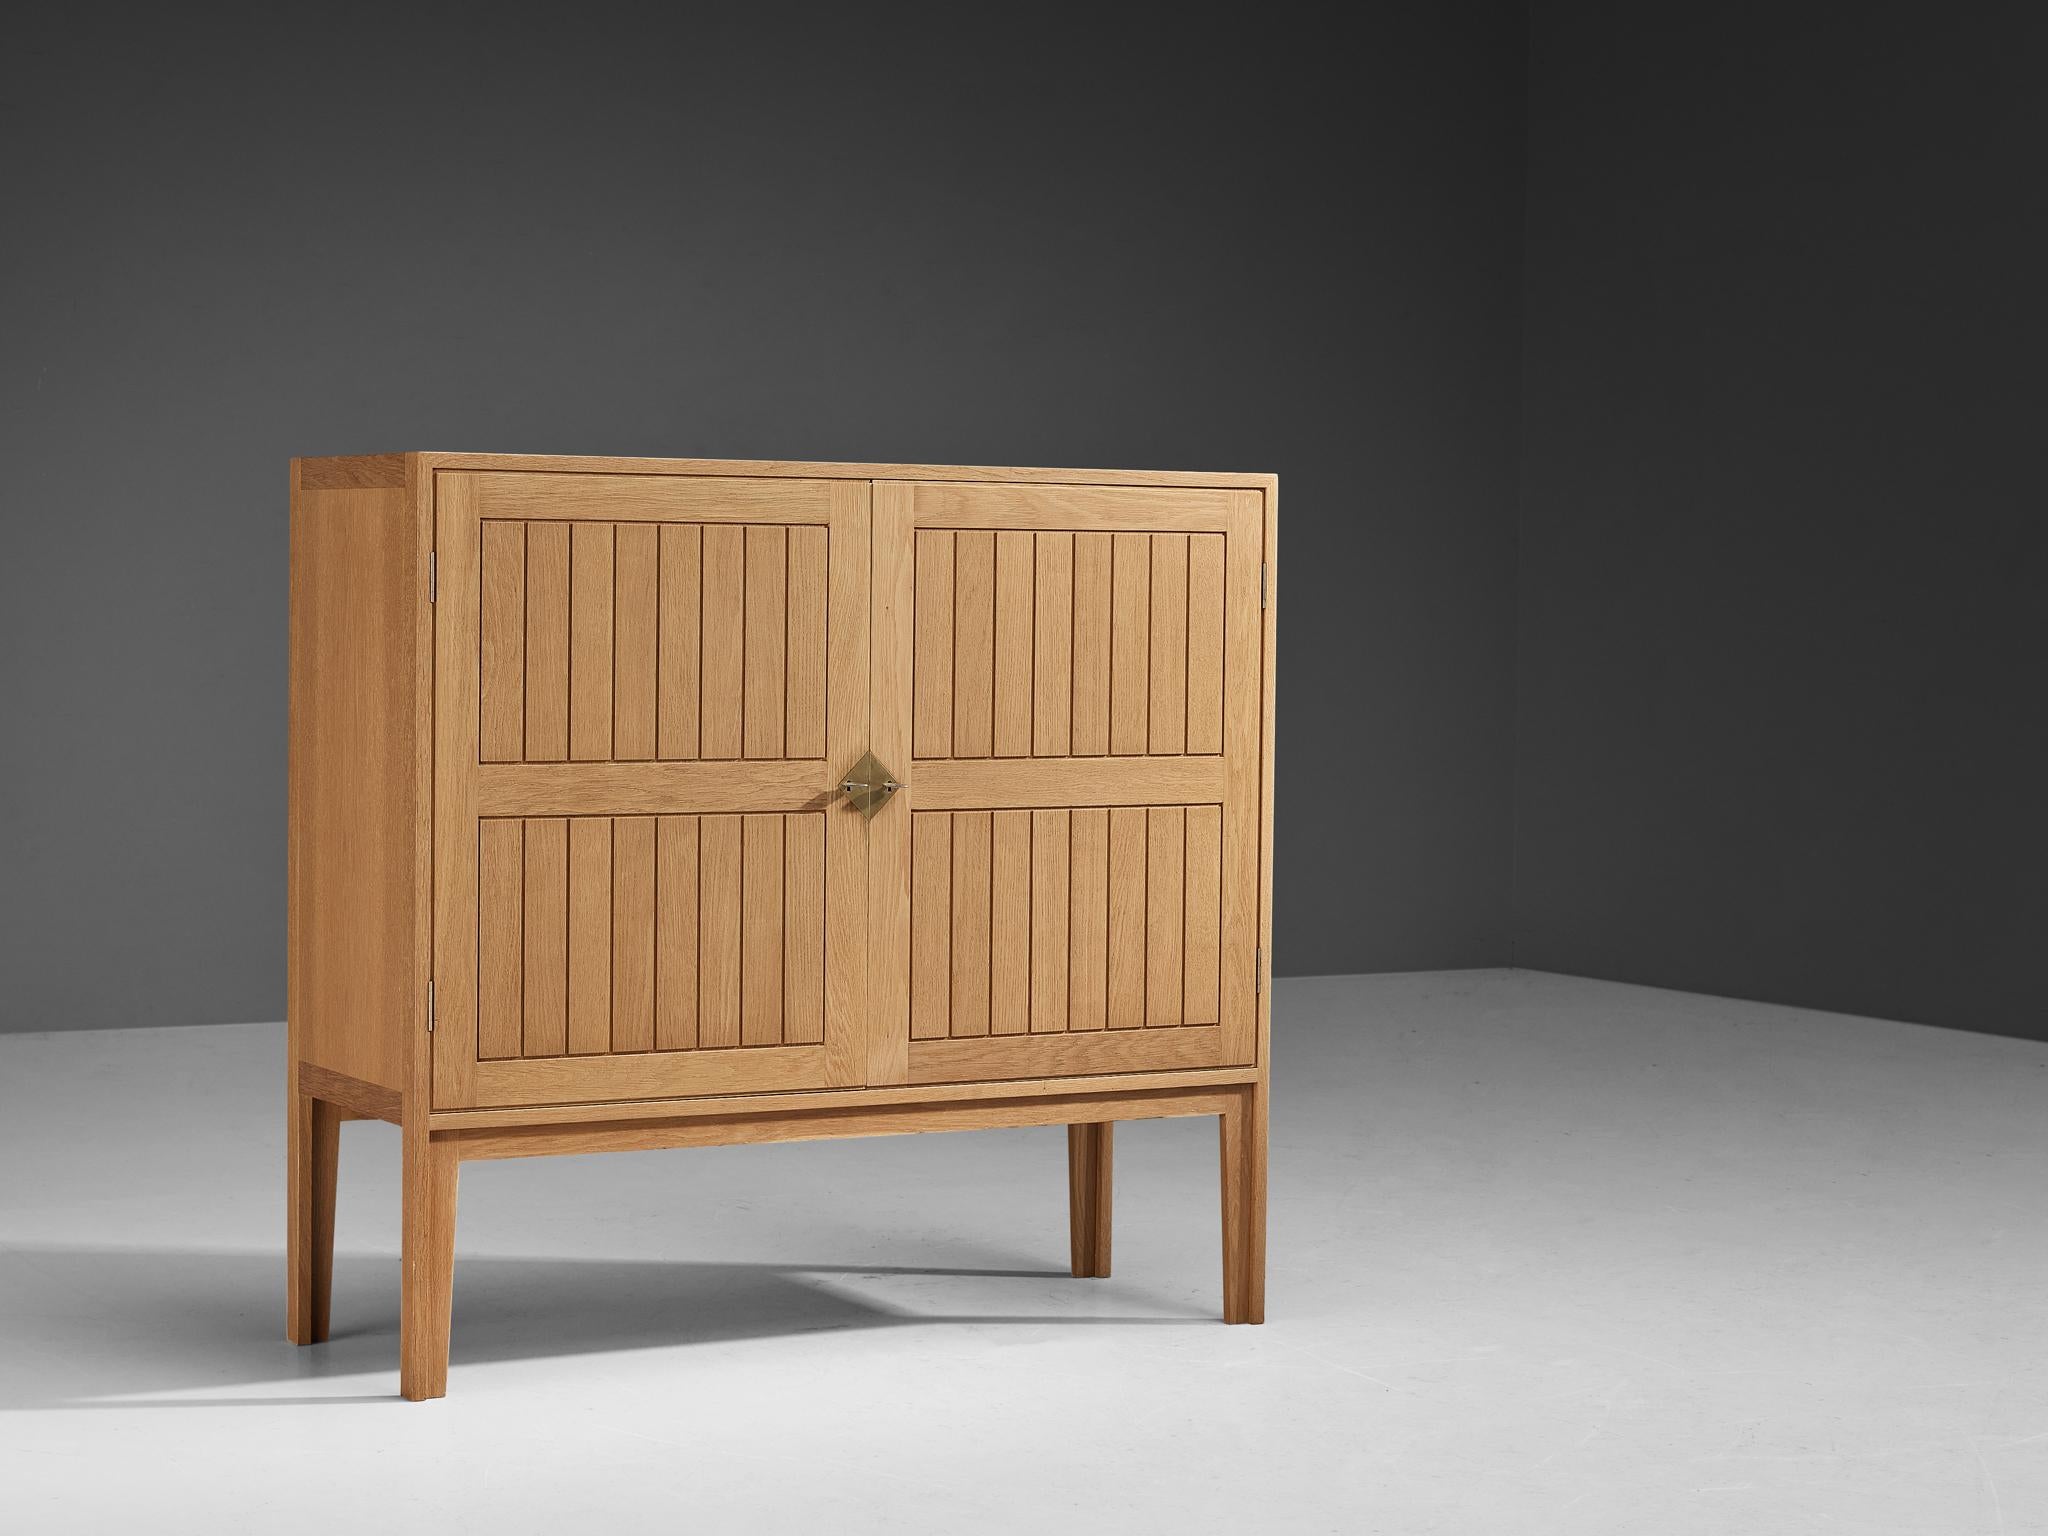 Kurt Østervig, cabinet, oak, Denmark, 1960s

Amazing cabinet by Danish designer Kurt Østervig, made in the 1960s. There are many design elements and detailing that elevate this piece in its appearance and practicality. The front of this piece has